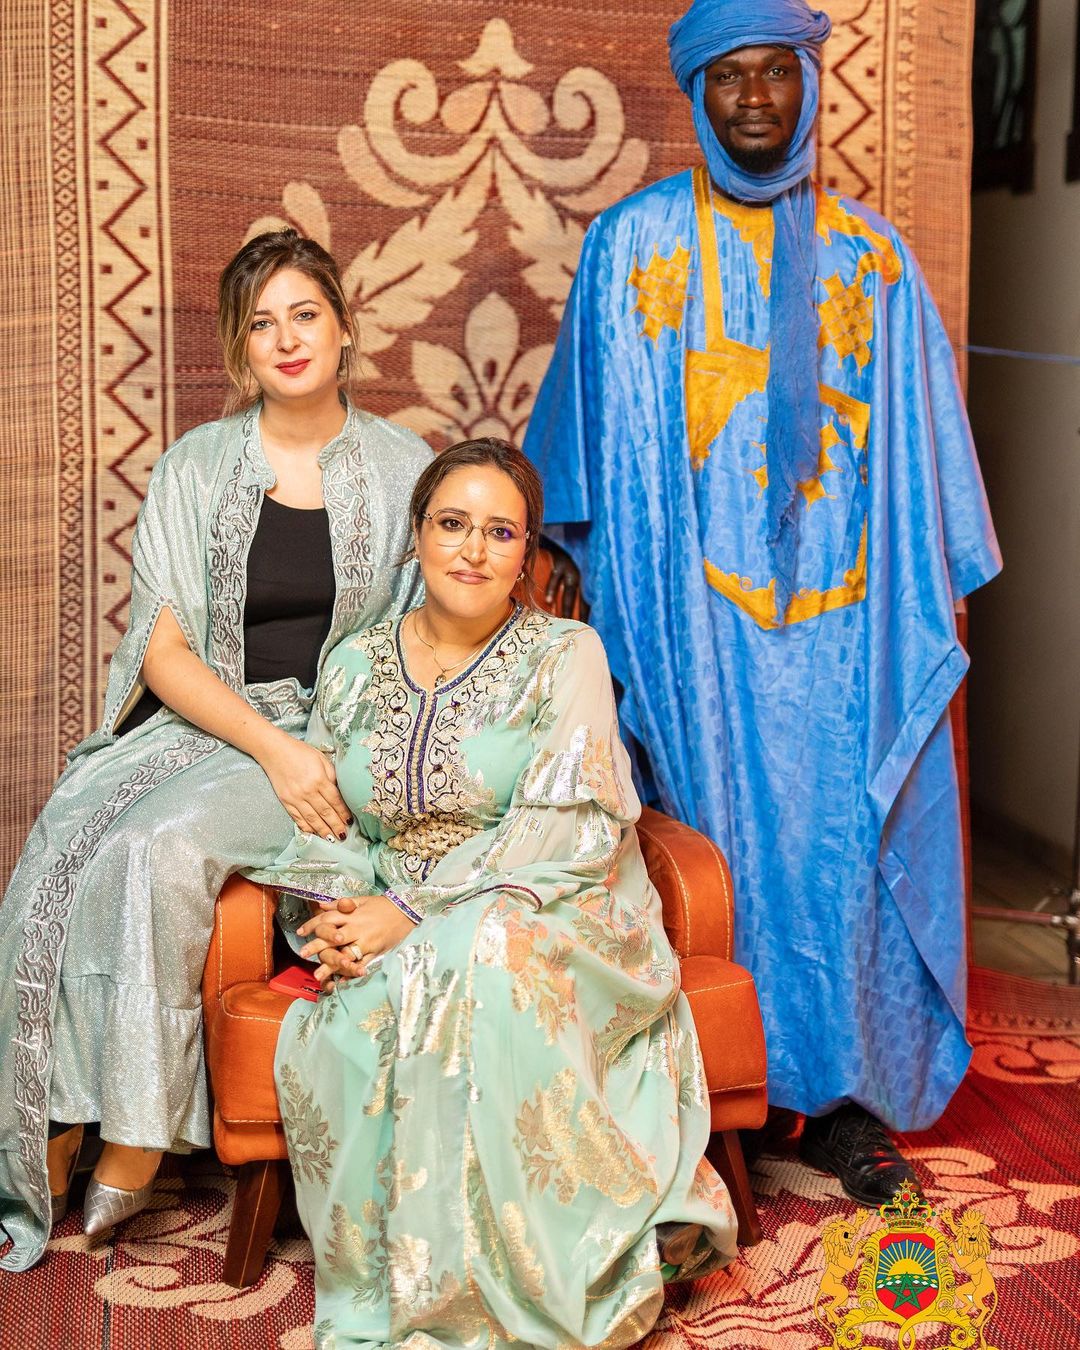 Moroccan Ambassador marks Women’s History month with fashion and food event